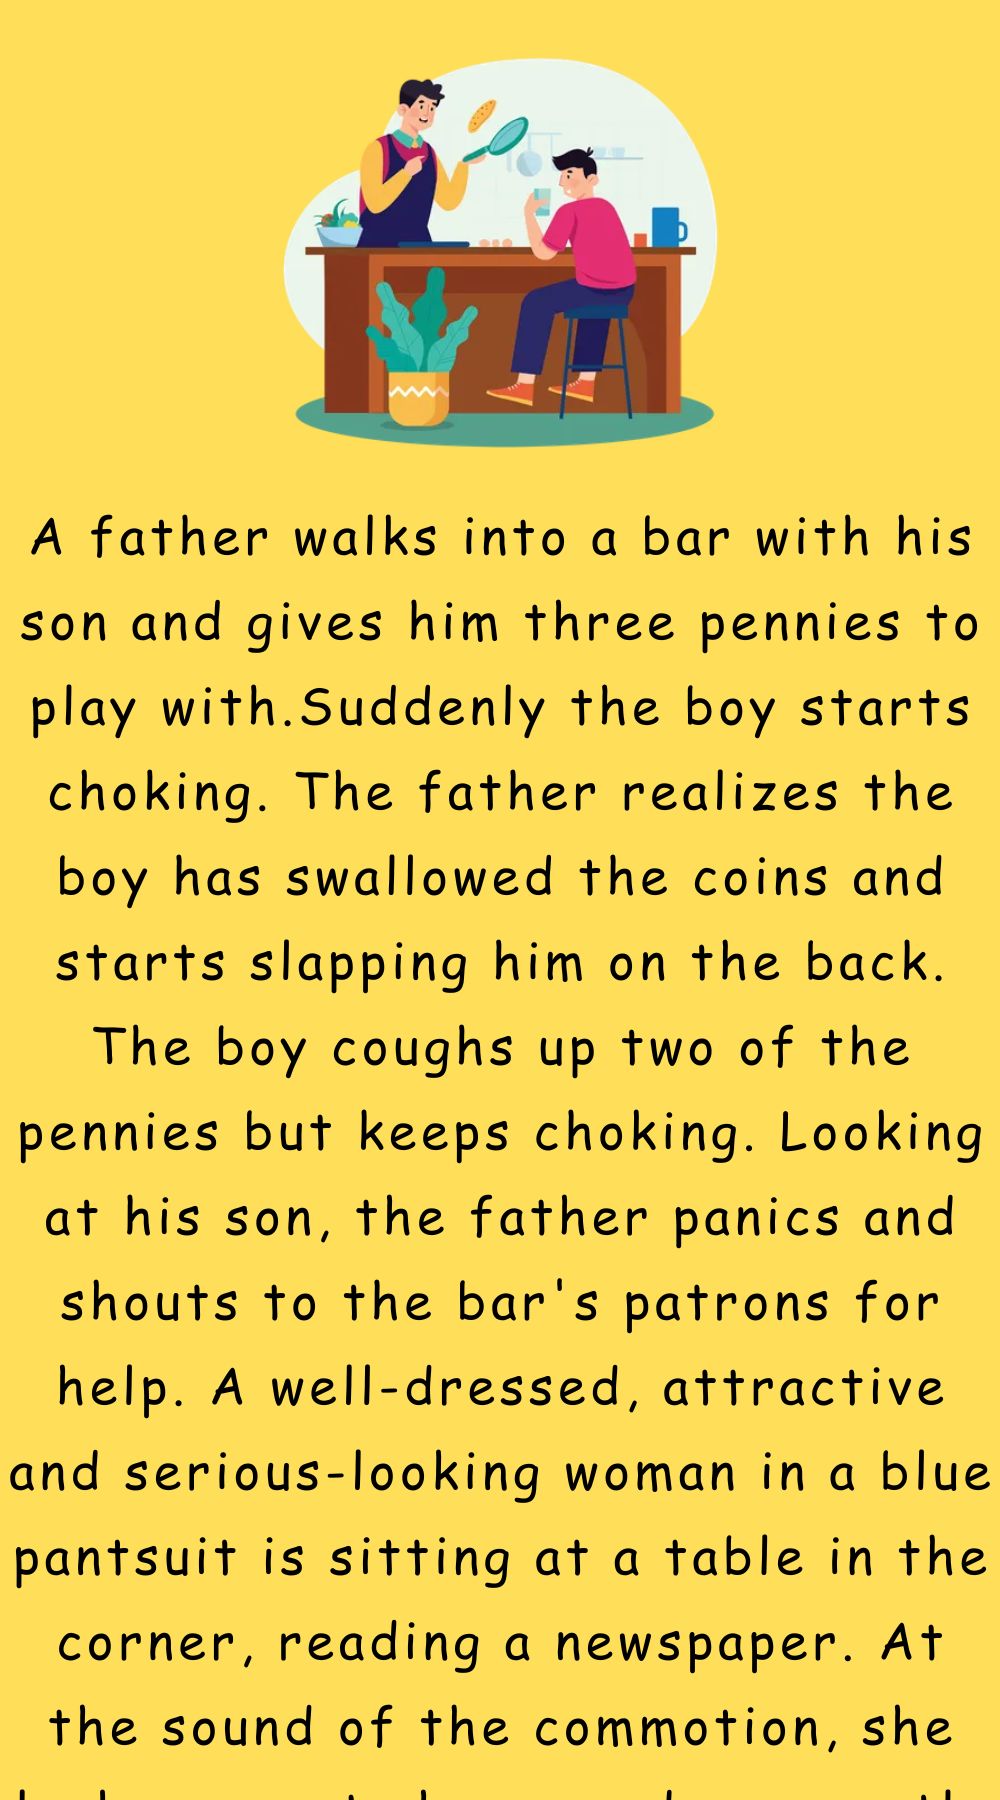 A father walks into a bar with his son